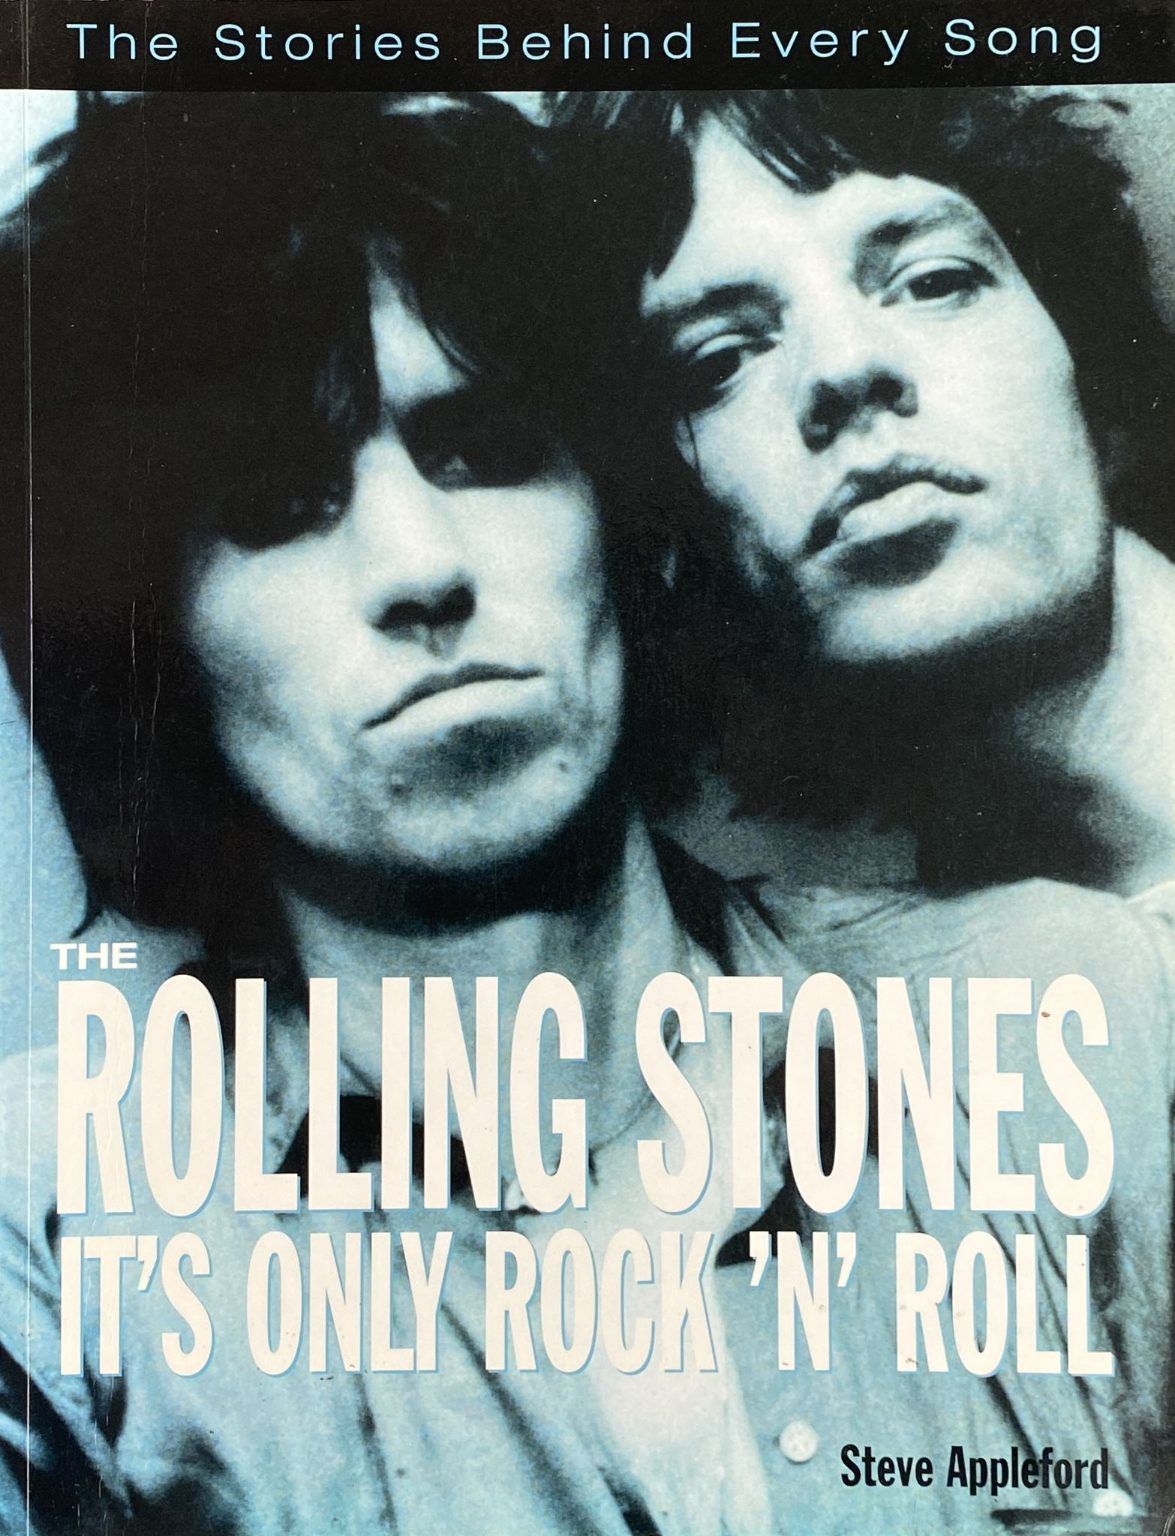 THE ROLLING STONES IT'S ONLY ROCK 'N' ROLL